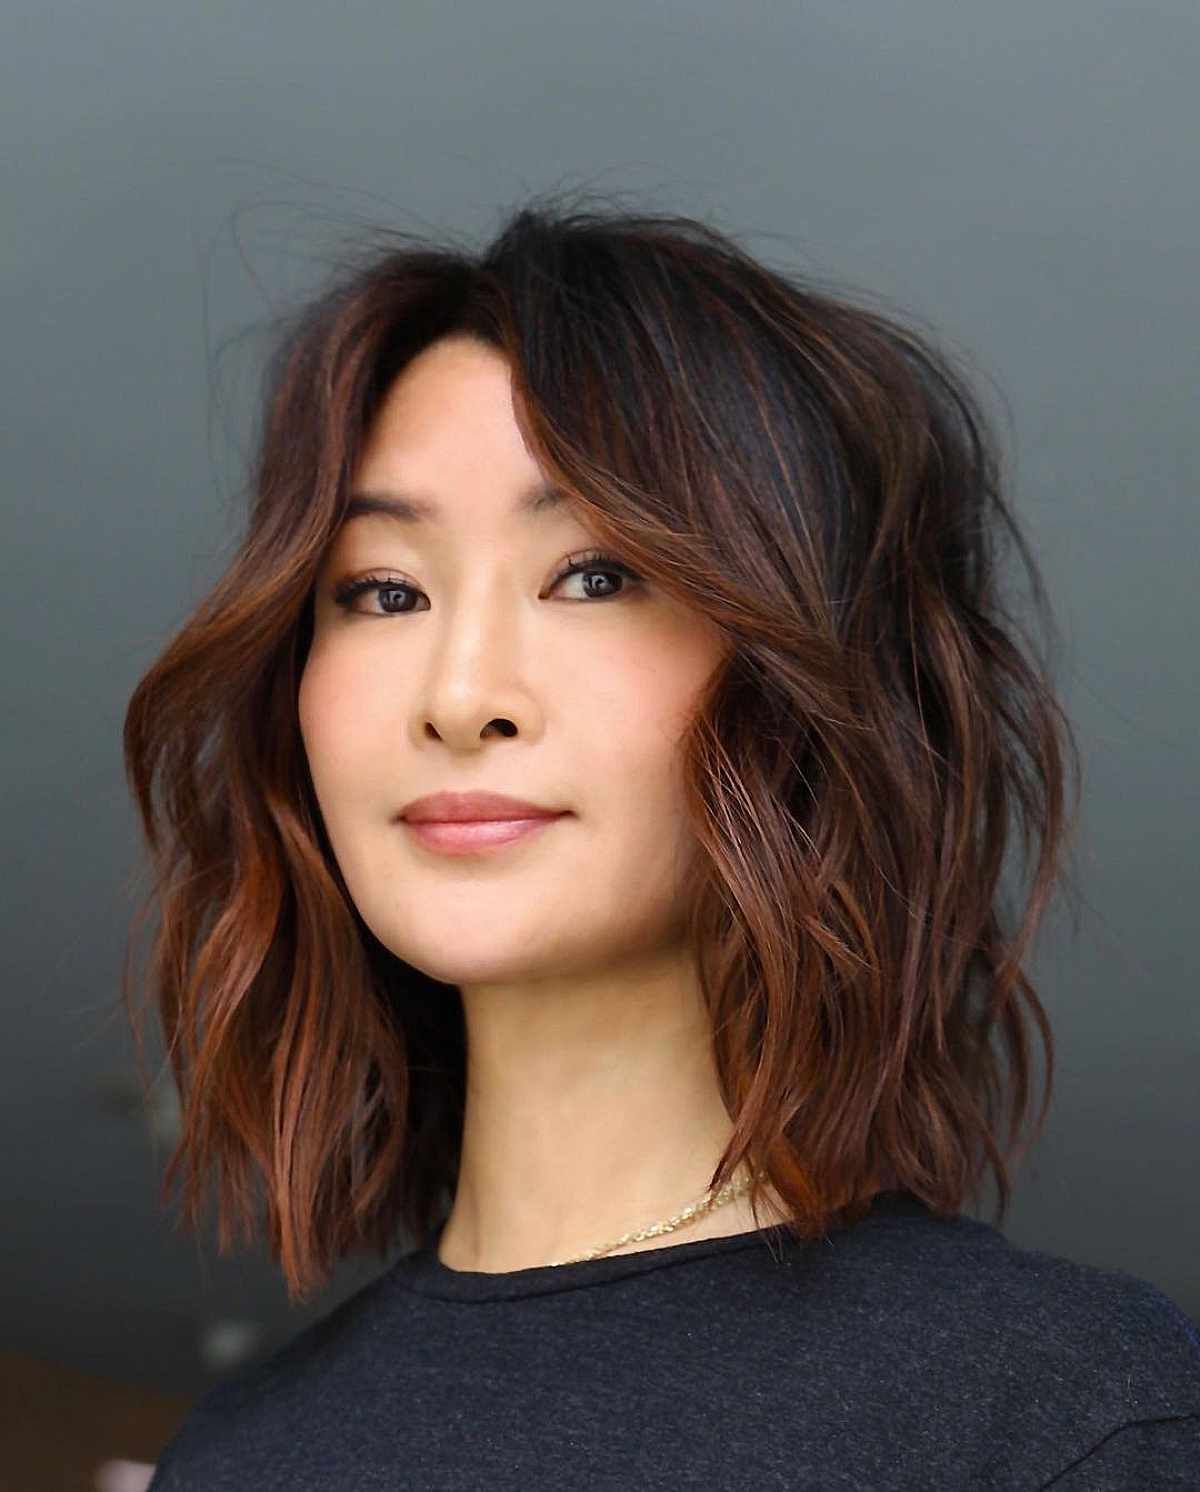 50+ Ideal Haircuts For Women With Thick Hair Throughout Textured Cut For Thick Hair (View 13 of 14)